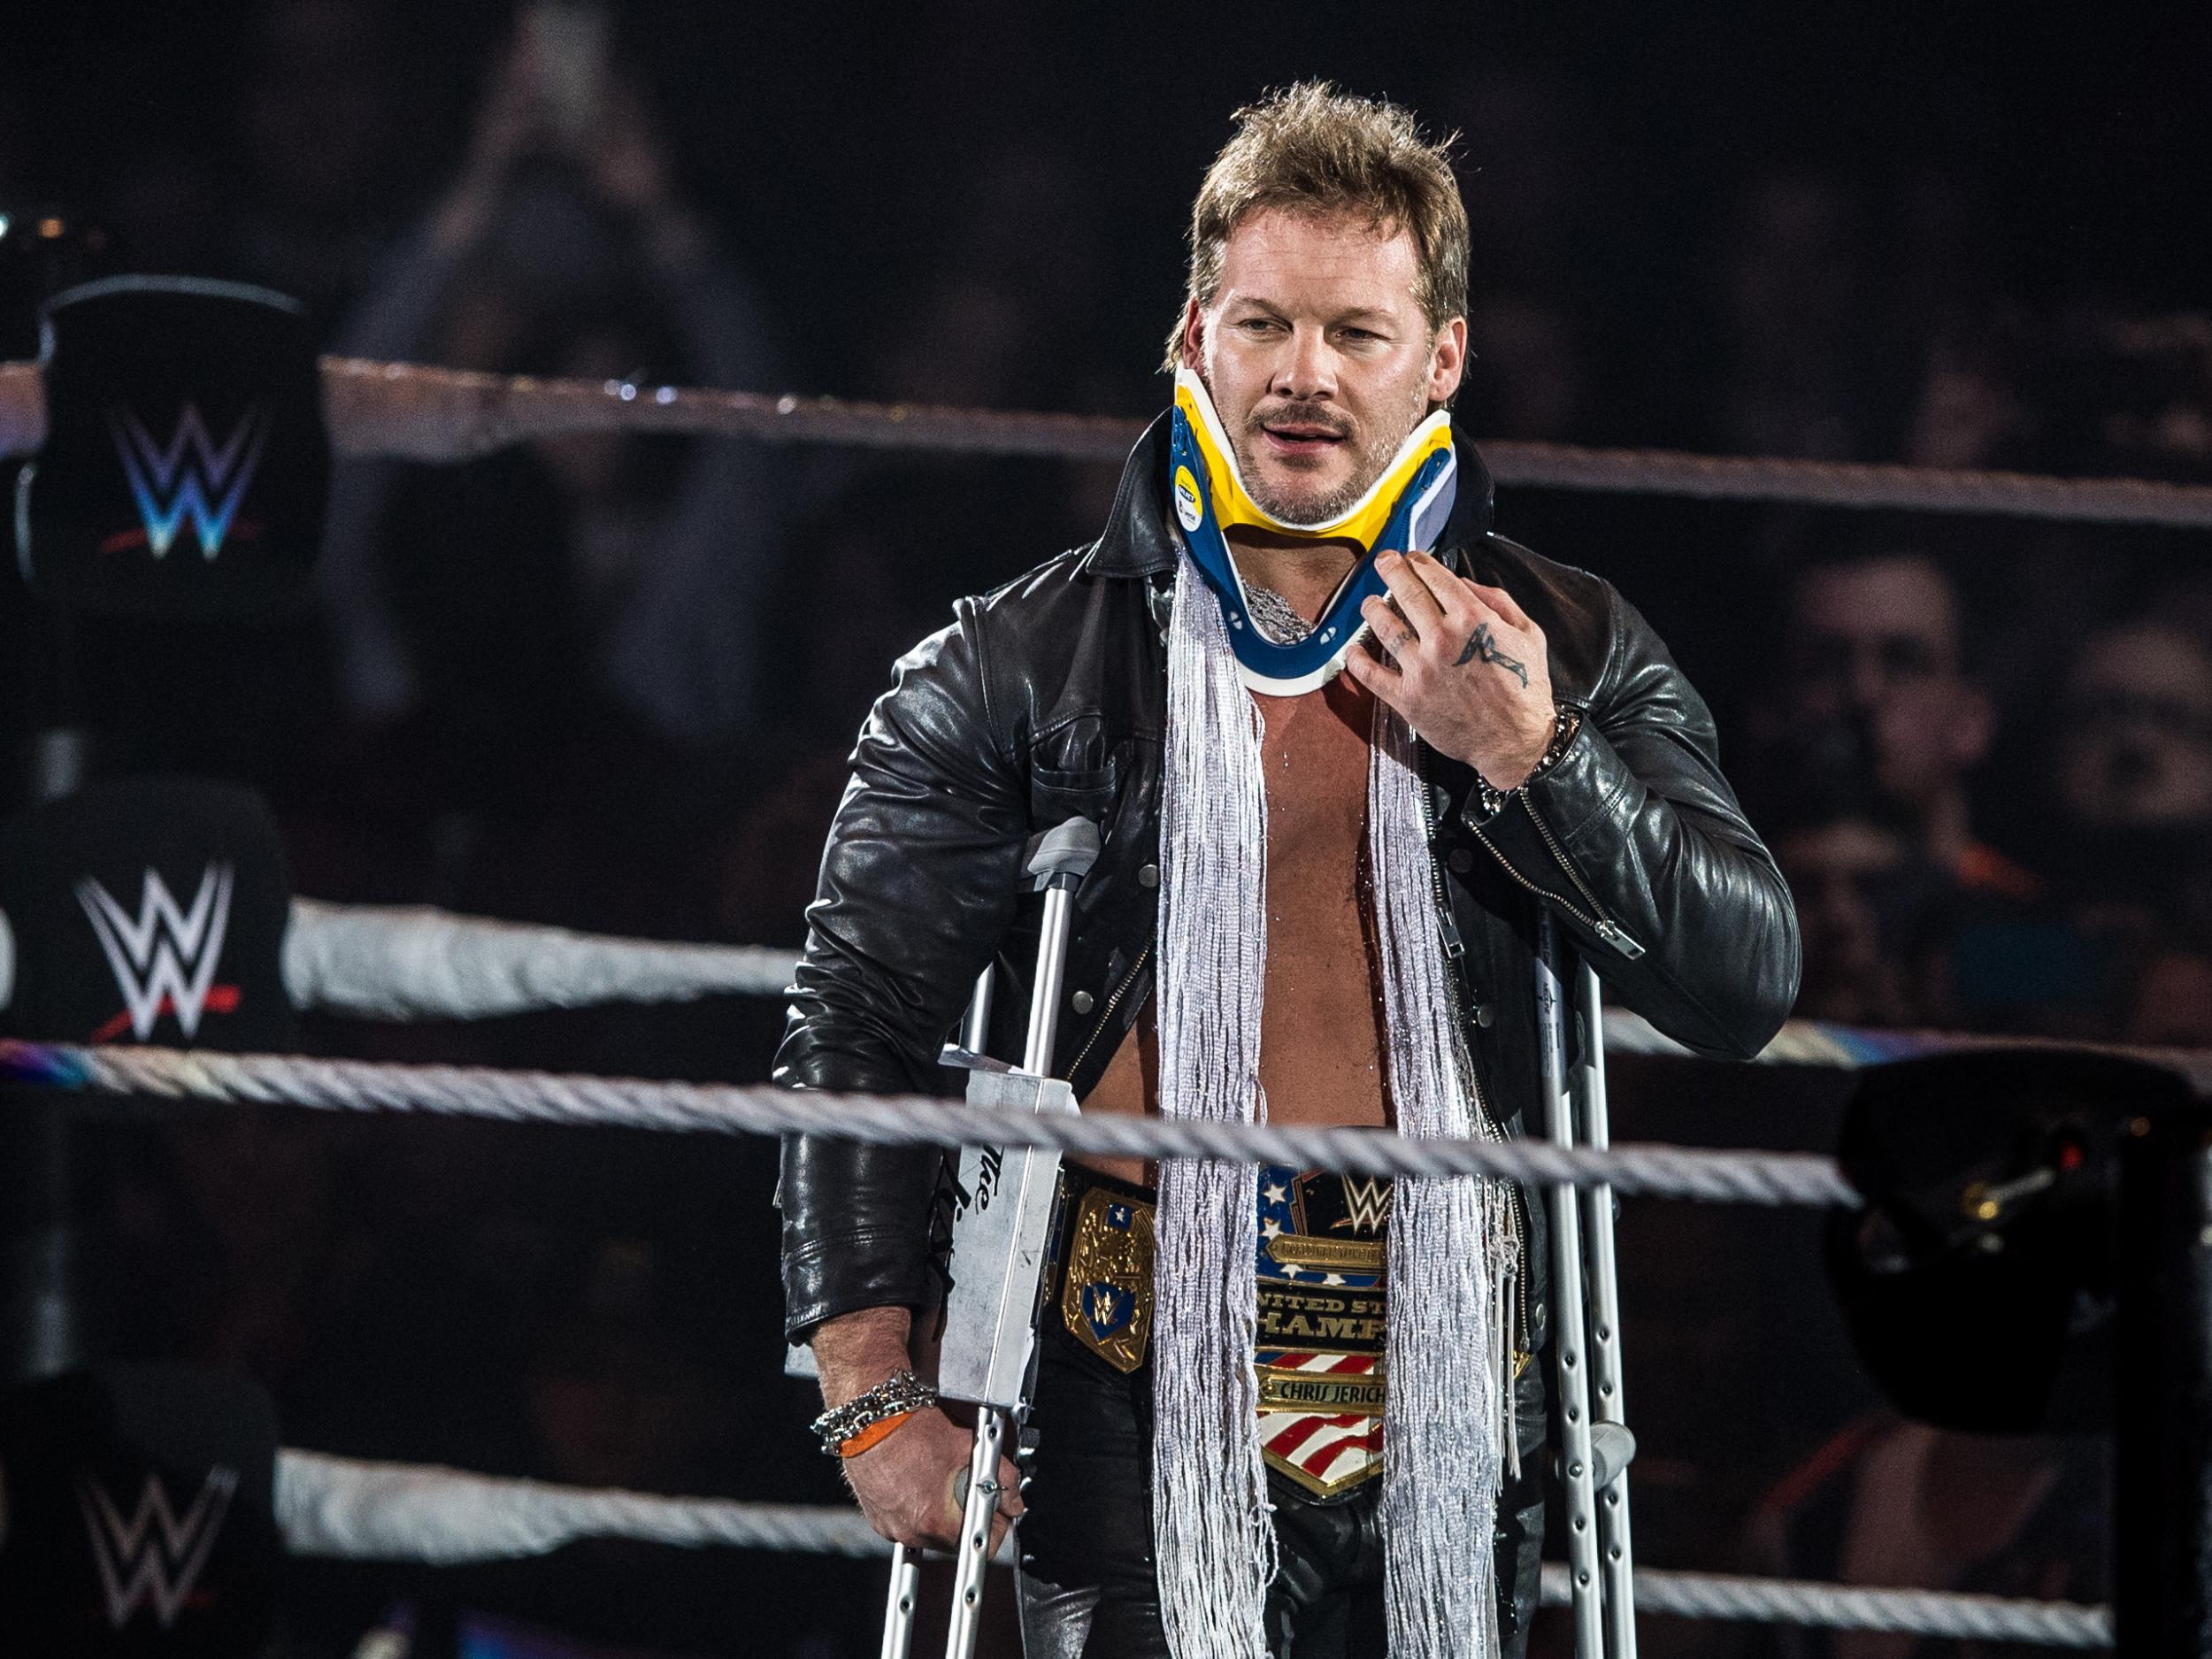 Jericho will be up against former best friend Kevin Owens